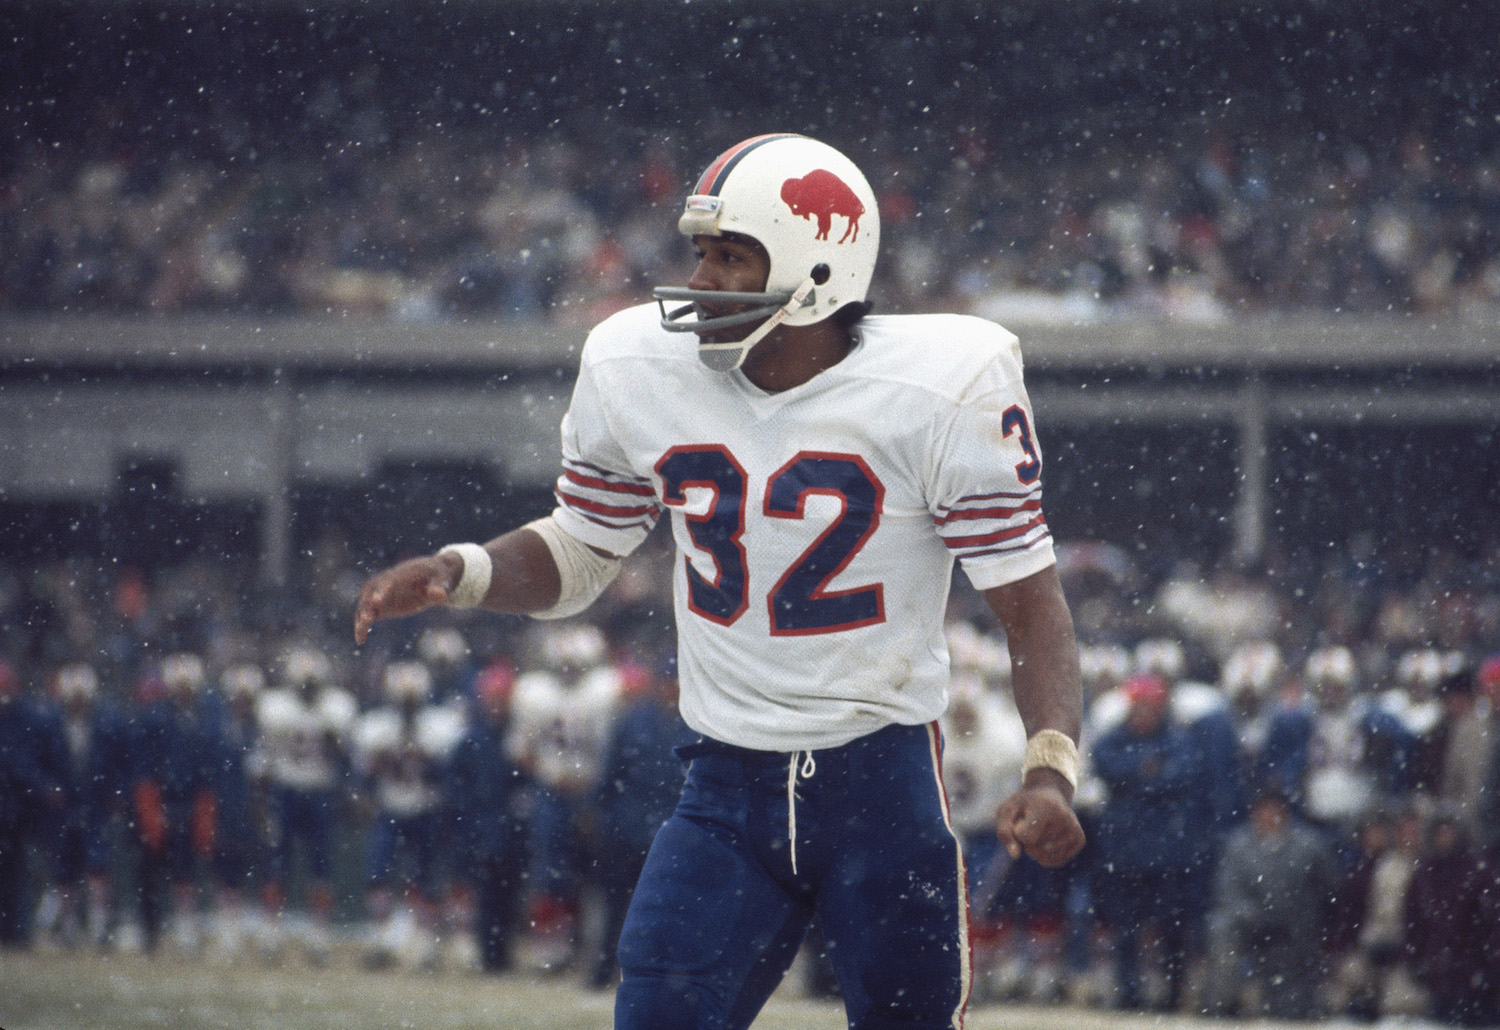 O.J. Simpson still thinks pretty highly of the Buffalo Bills, even in retirement. | Photo by Focus on Sport via Getty Images